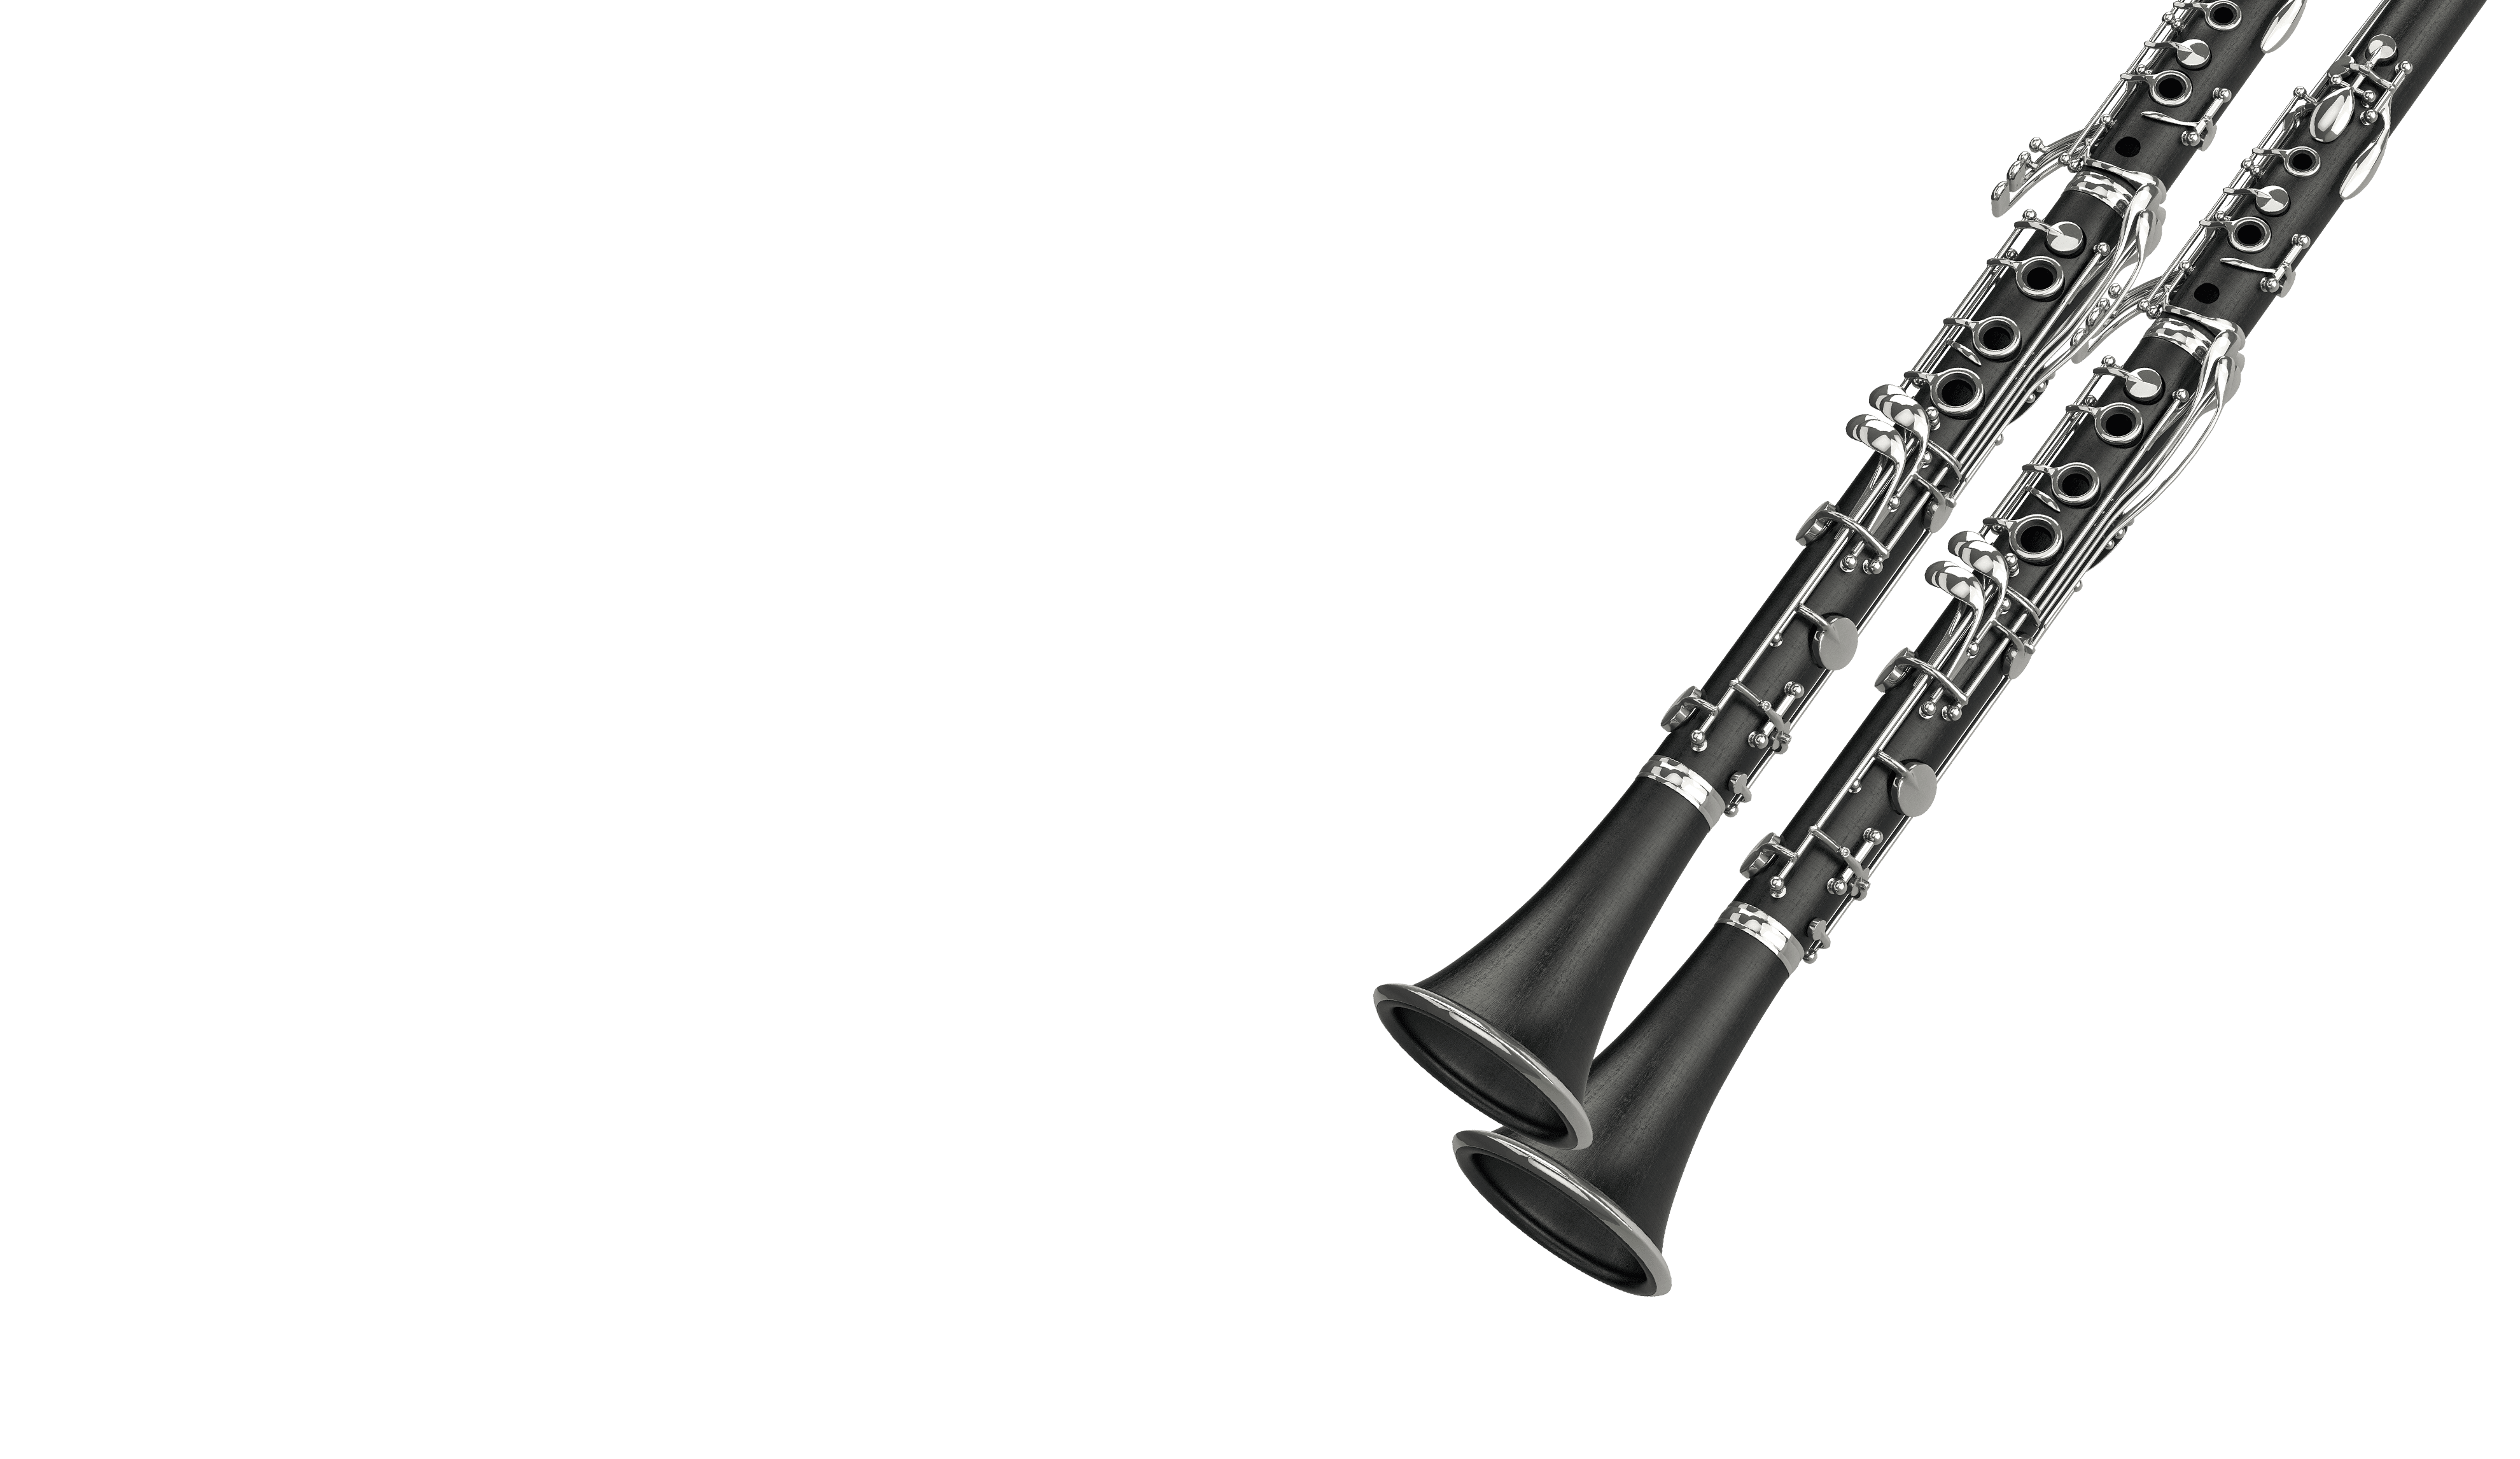 CLAIRE CLARINET GENERAL OVERVIEW